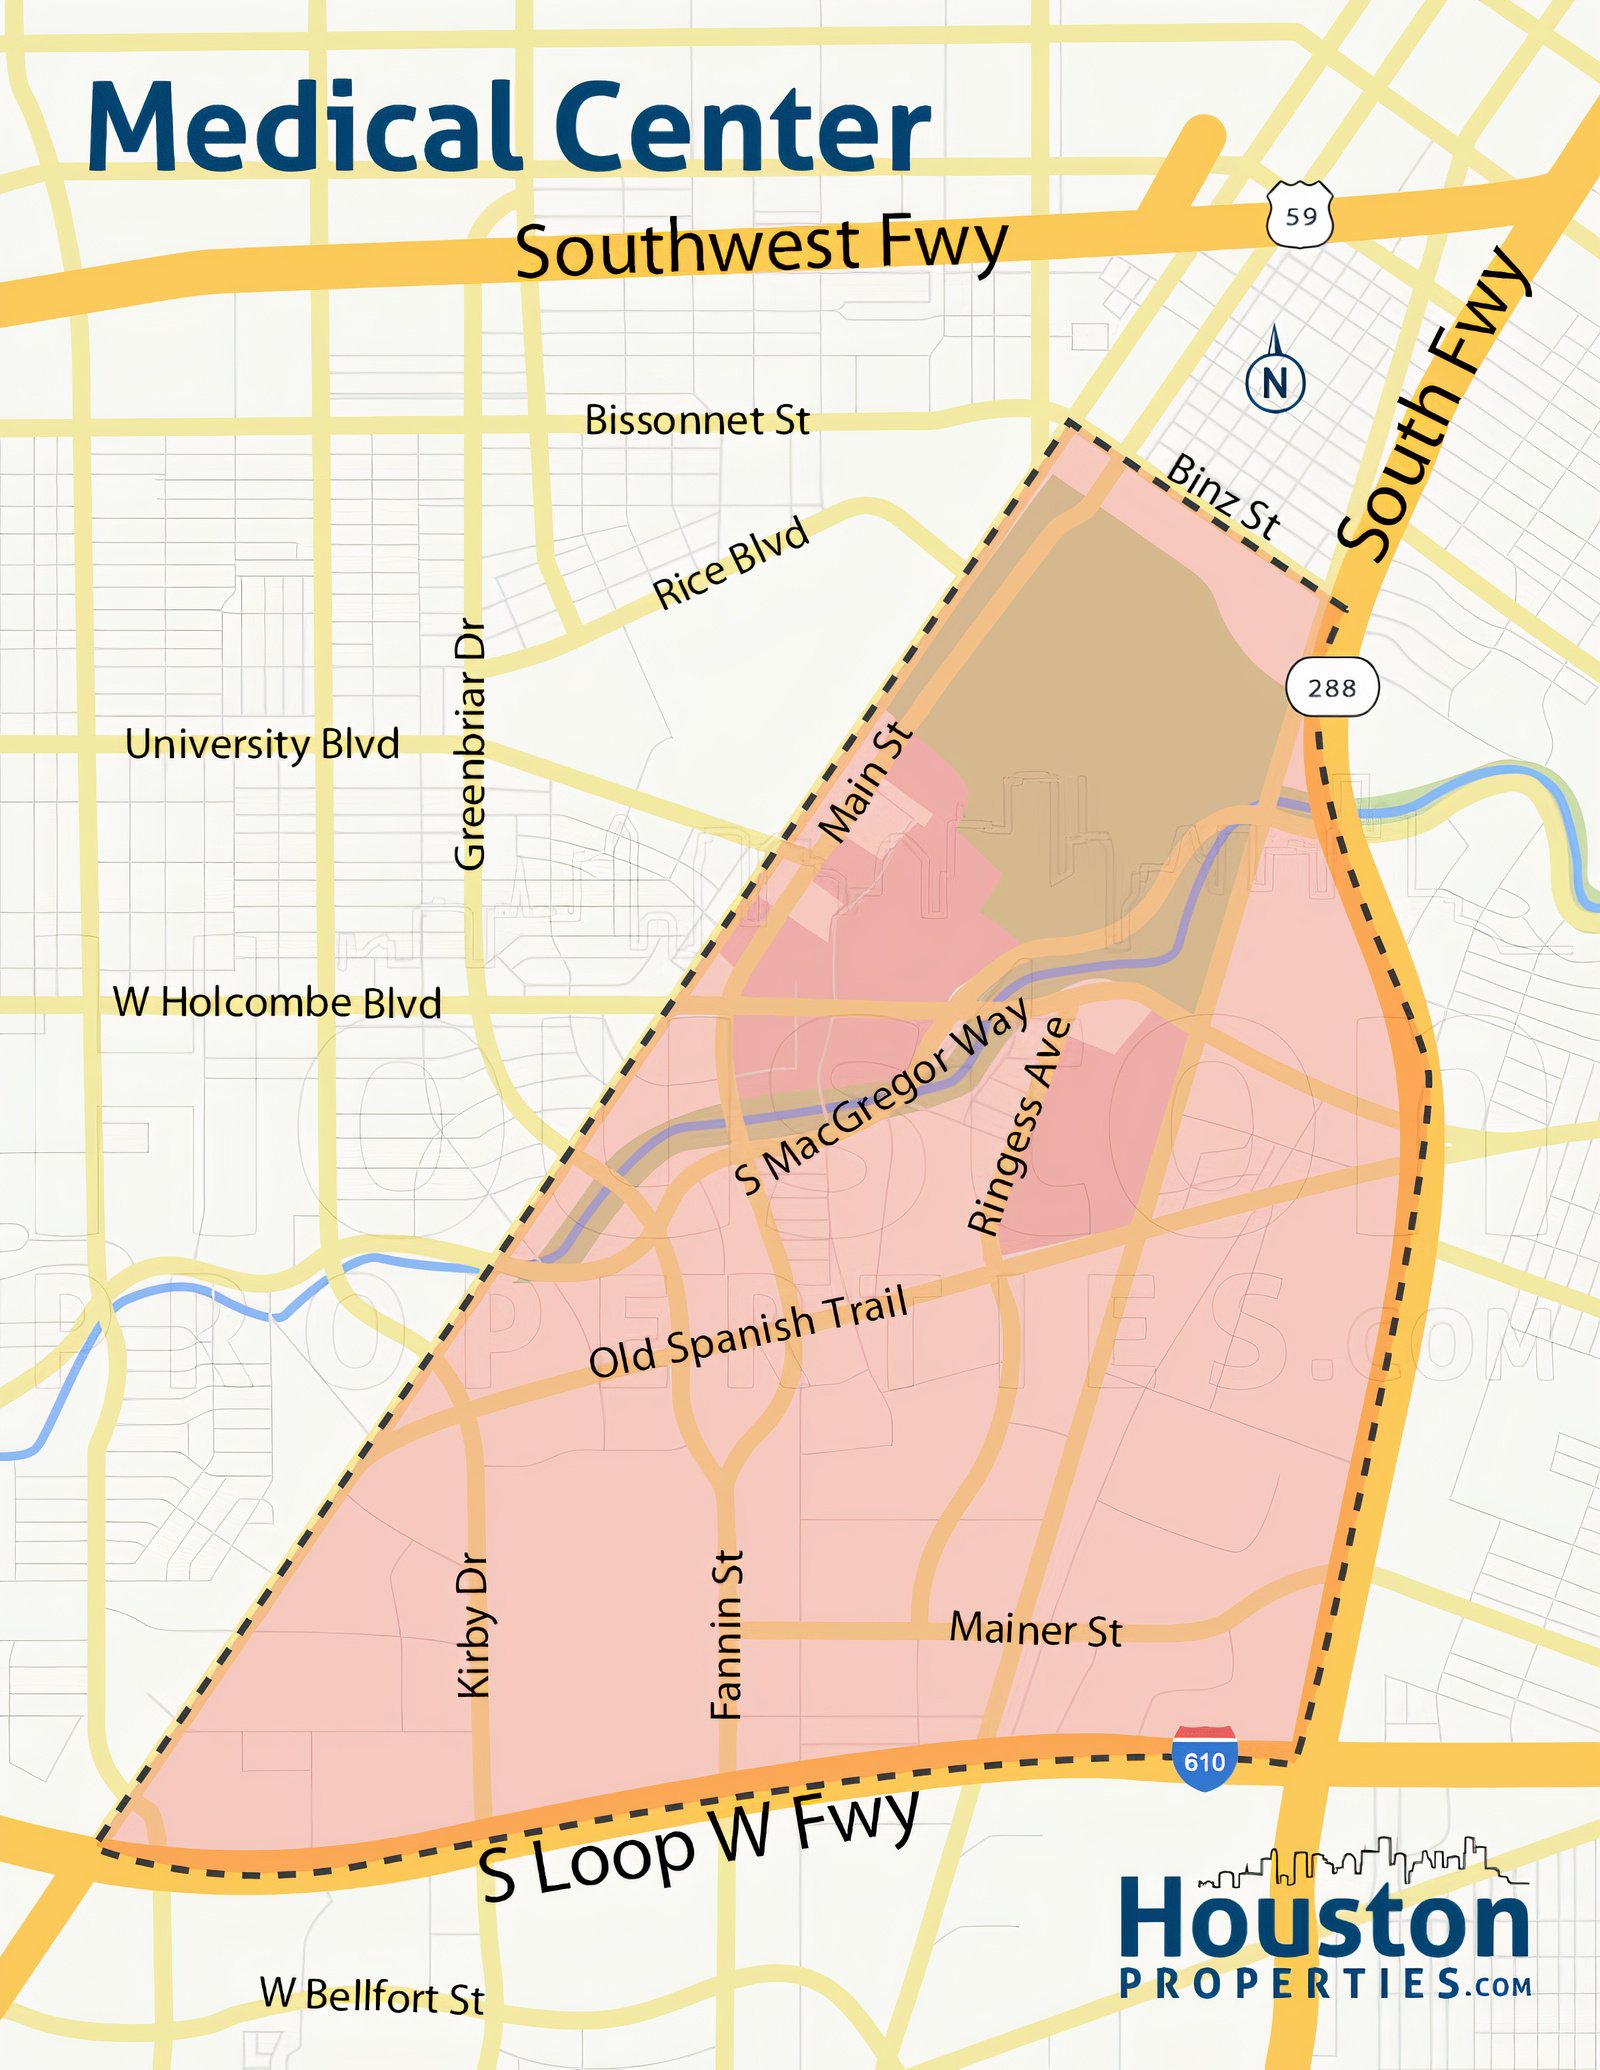 Map of Medical Center Area